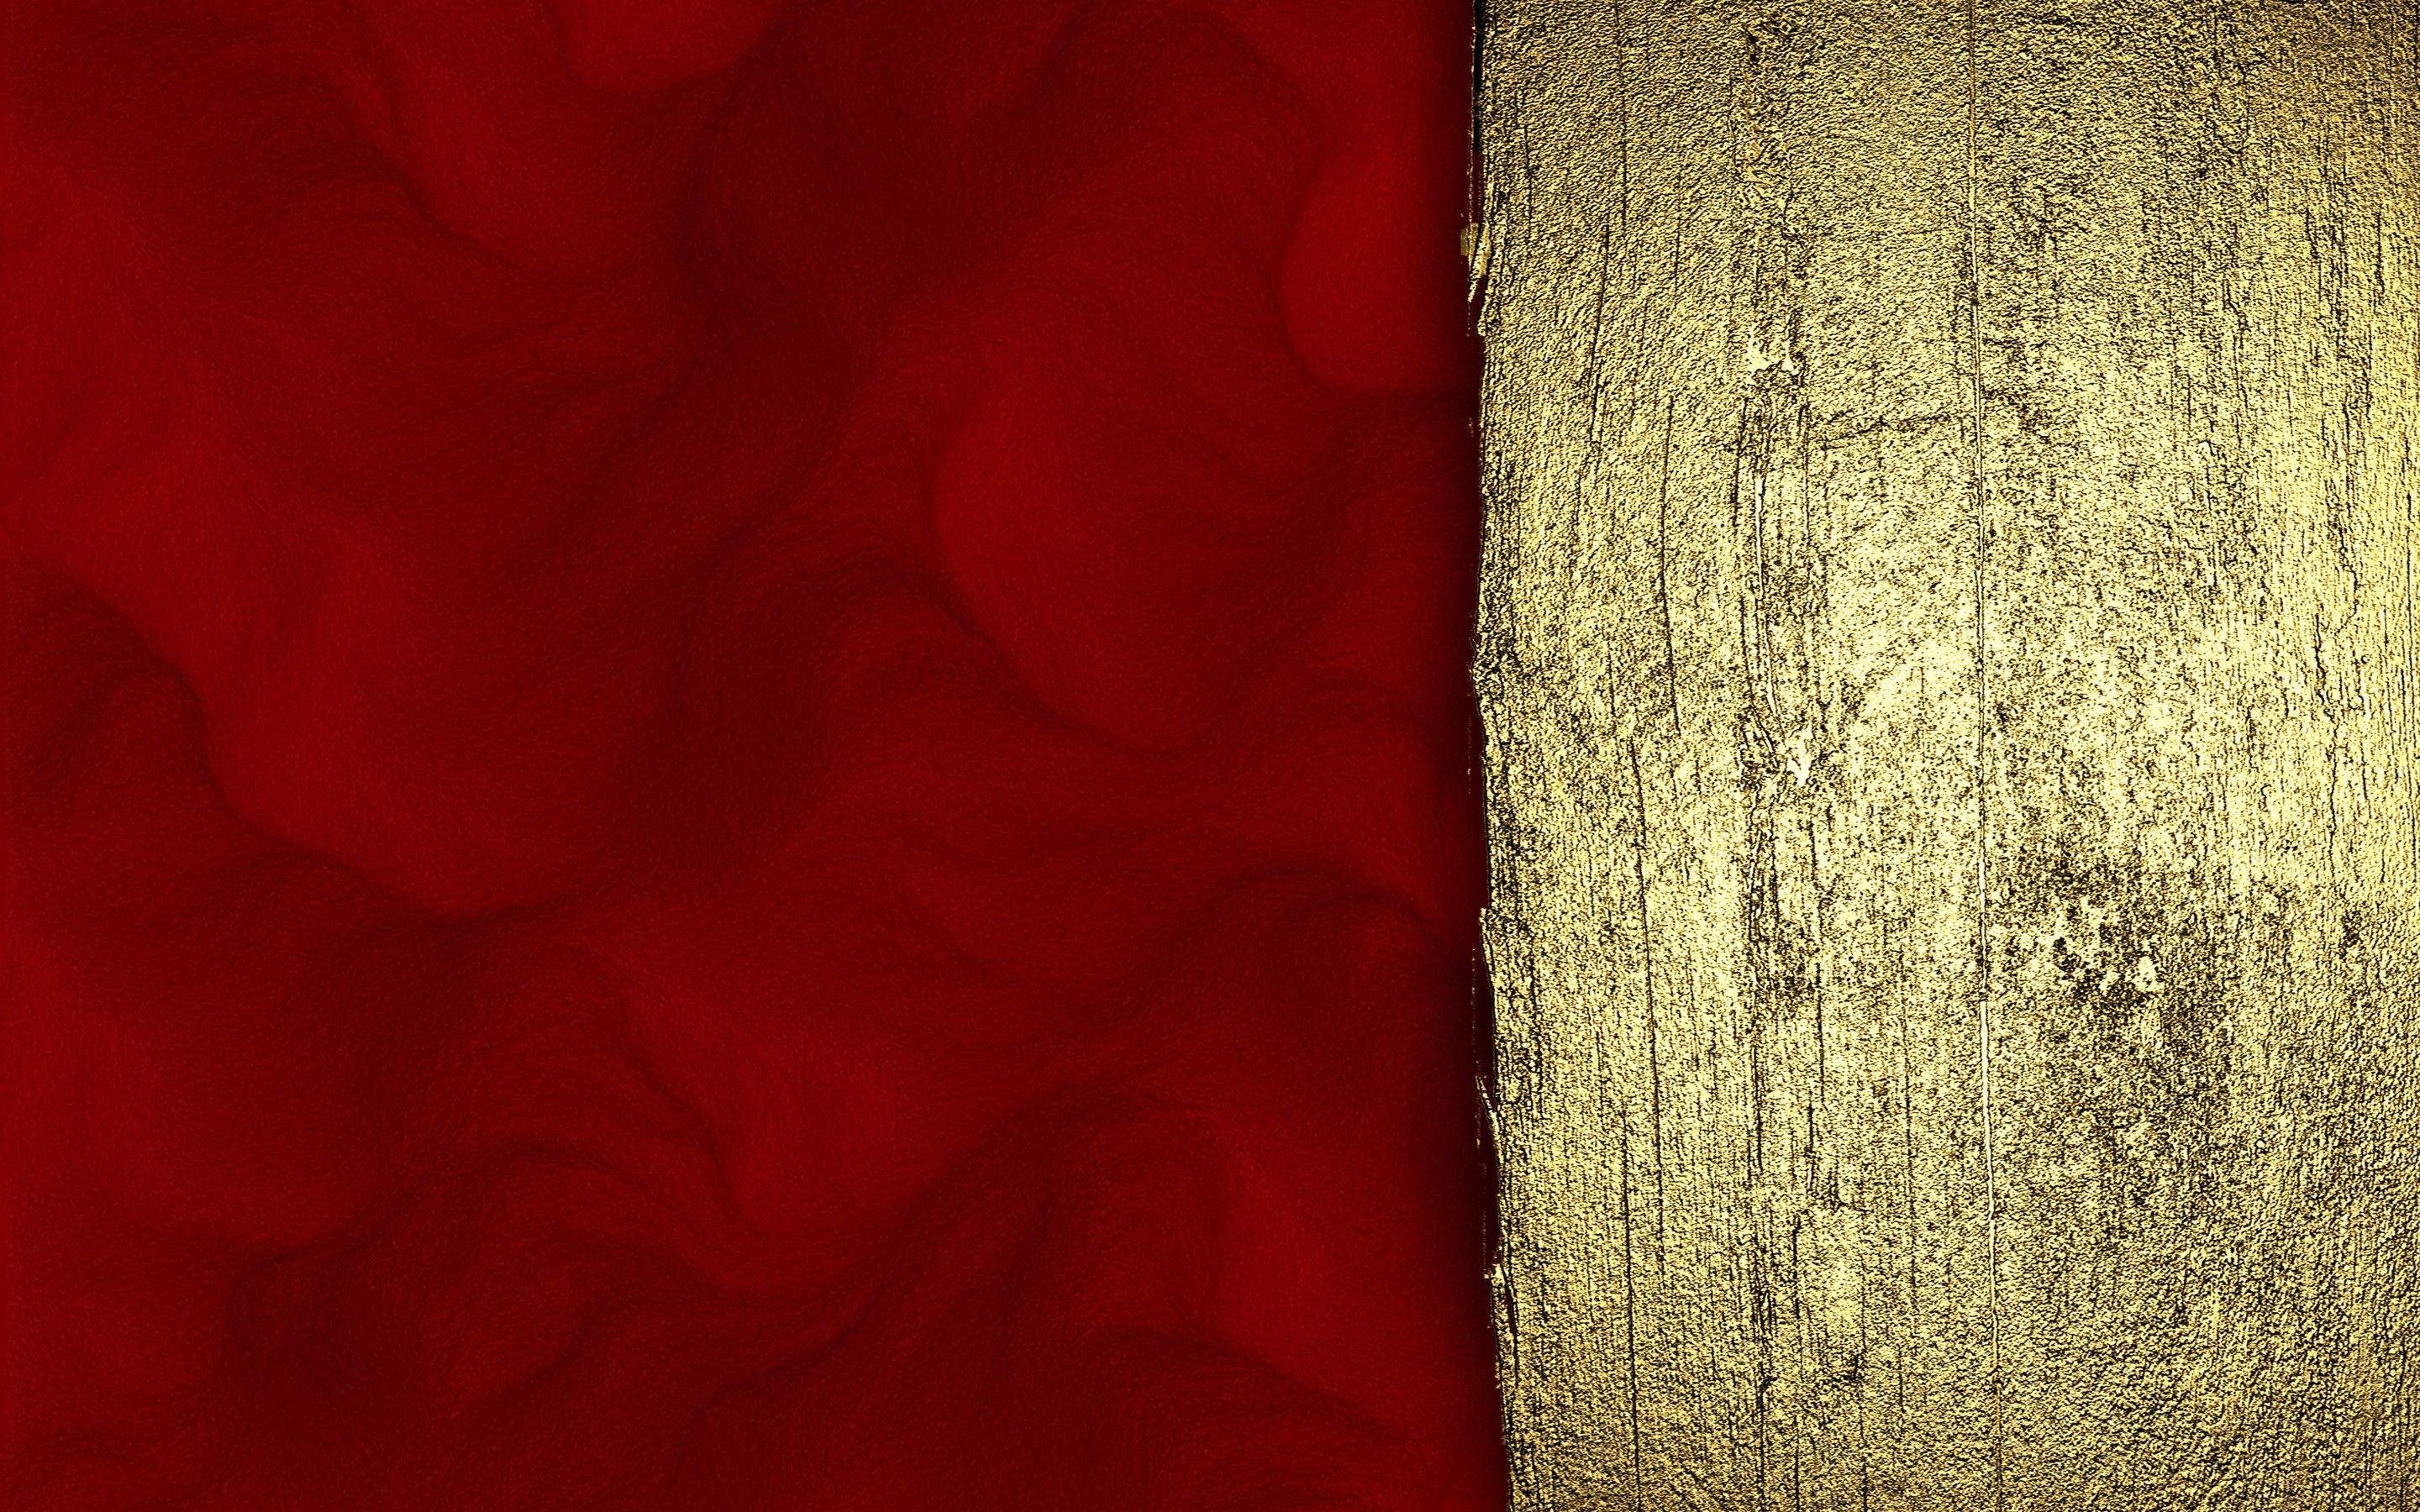 Red and Gold B Logo - Red and Gold backgroundDownload free awesome wallpaper